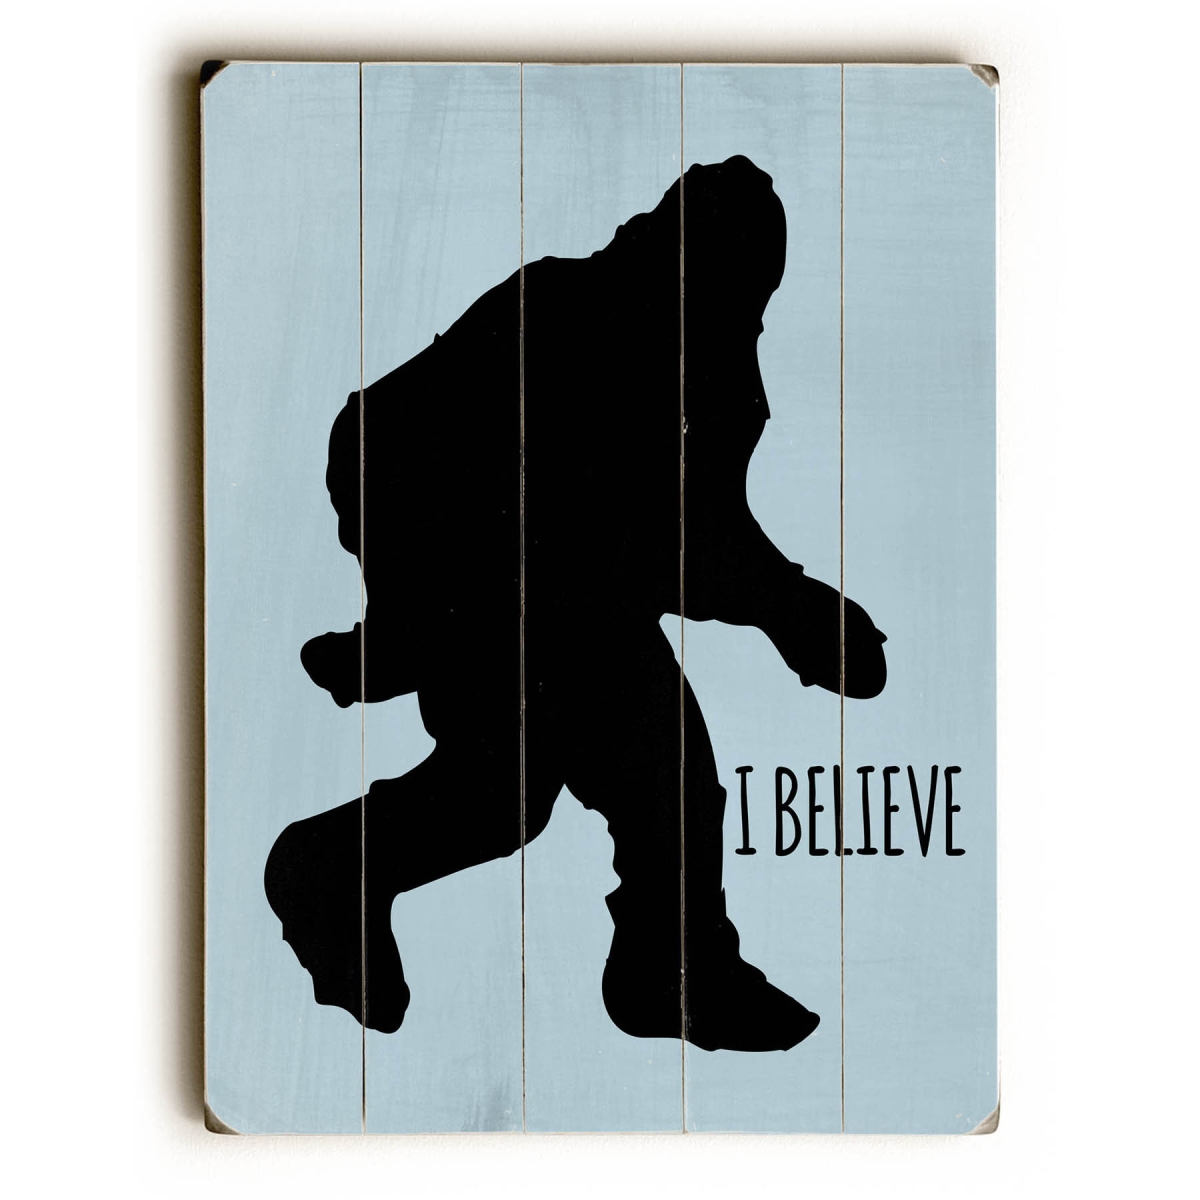 0004-8559-25 9 X 12 In. I Believe Solid Wood Wall Decor By Ginger Oliphant